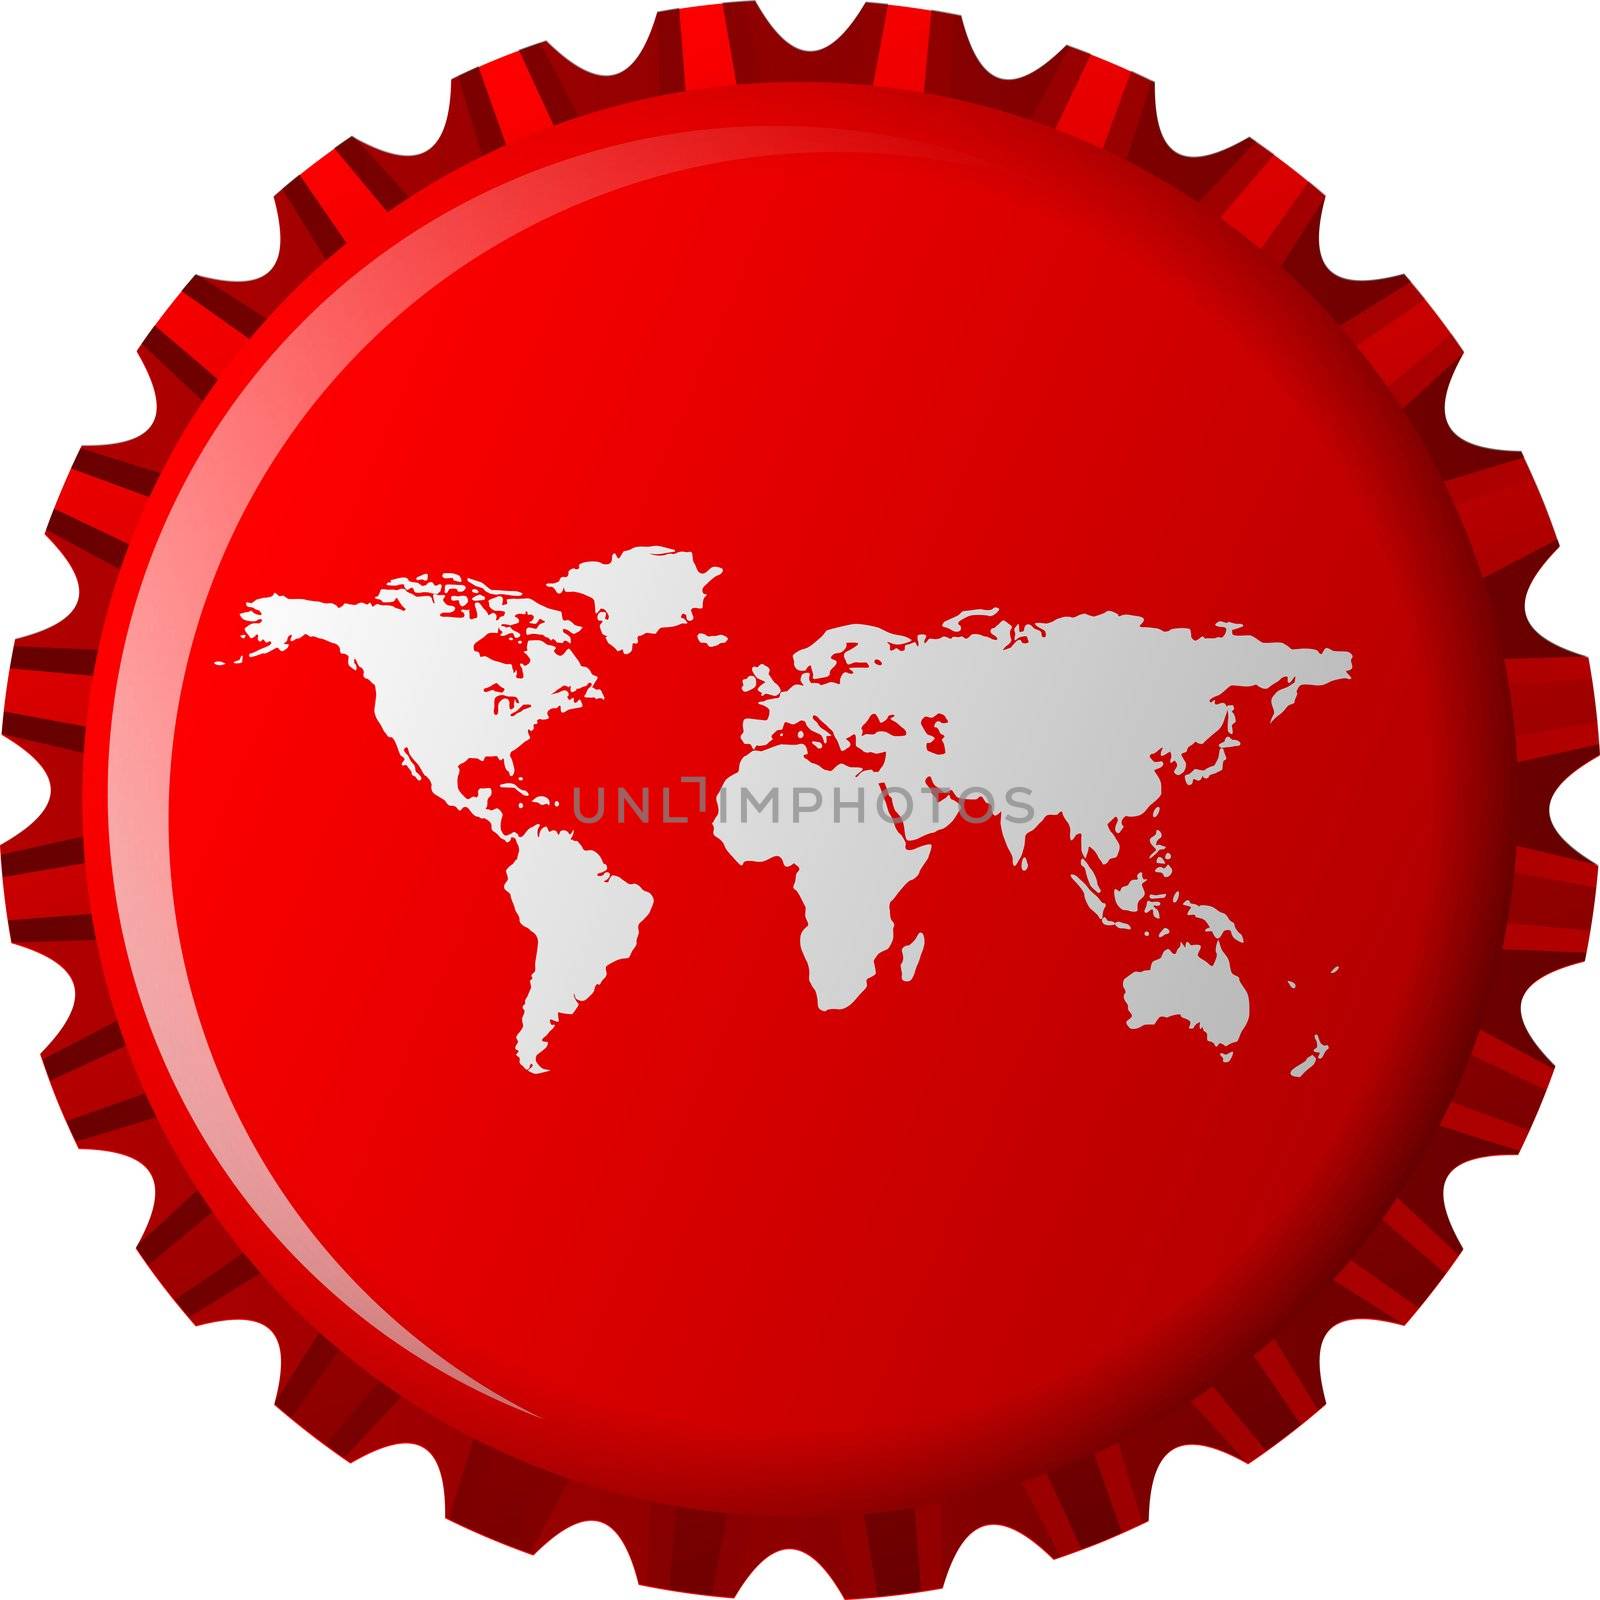 white world map on red bottle cap by robertosch